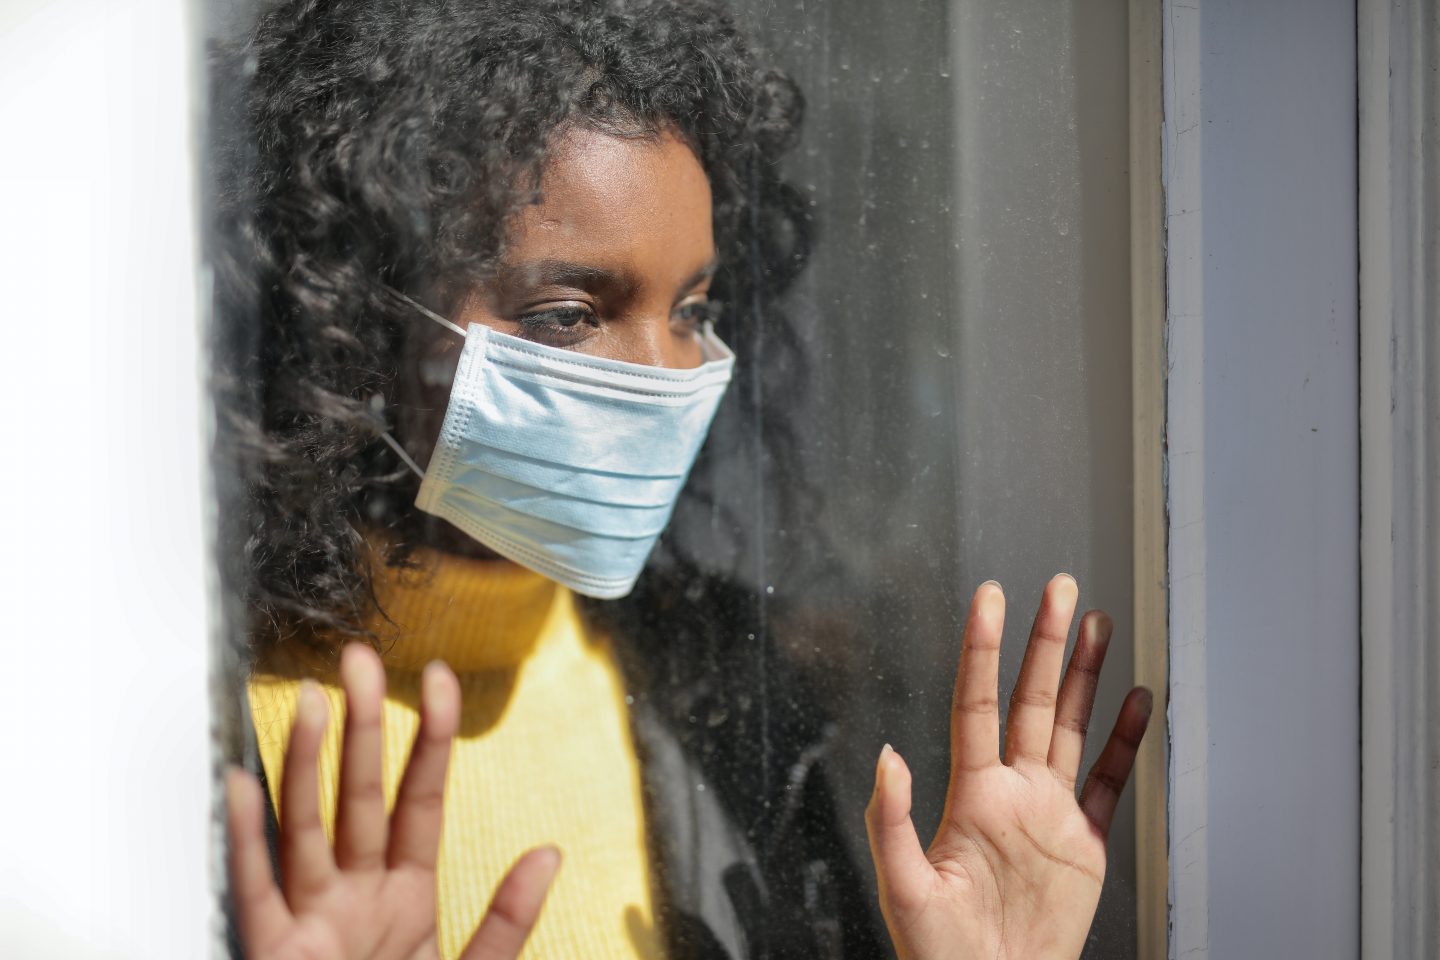 A woman in a yellow top, with dark curly hair and dark skin is looking out the window; she's wearing a mask and has her hands up to the glass as though in lockdown during the pandemic.